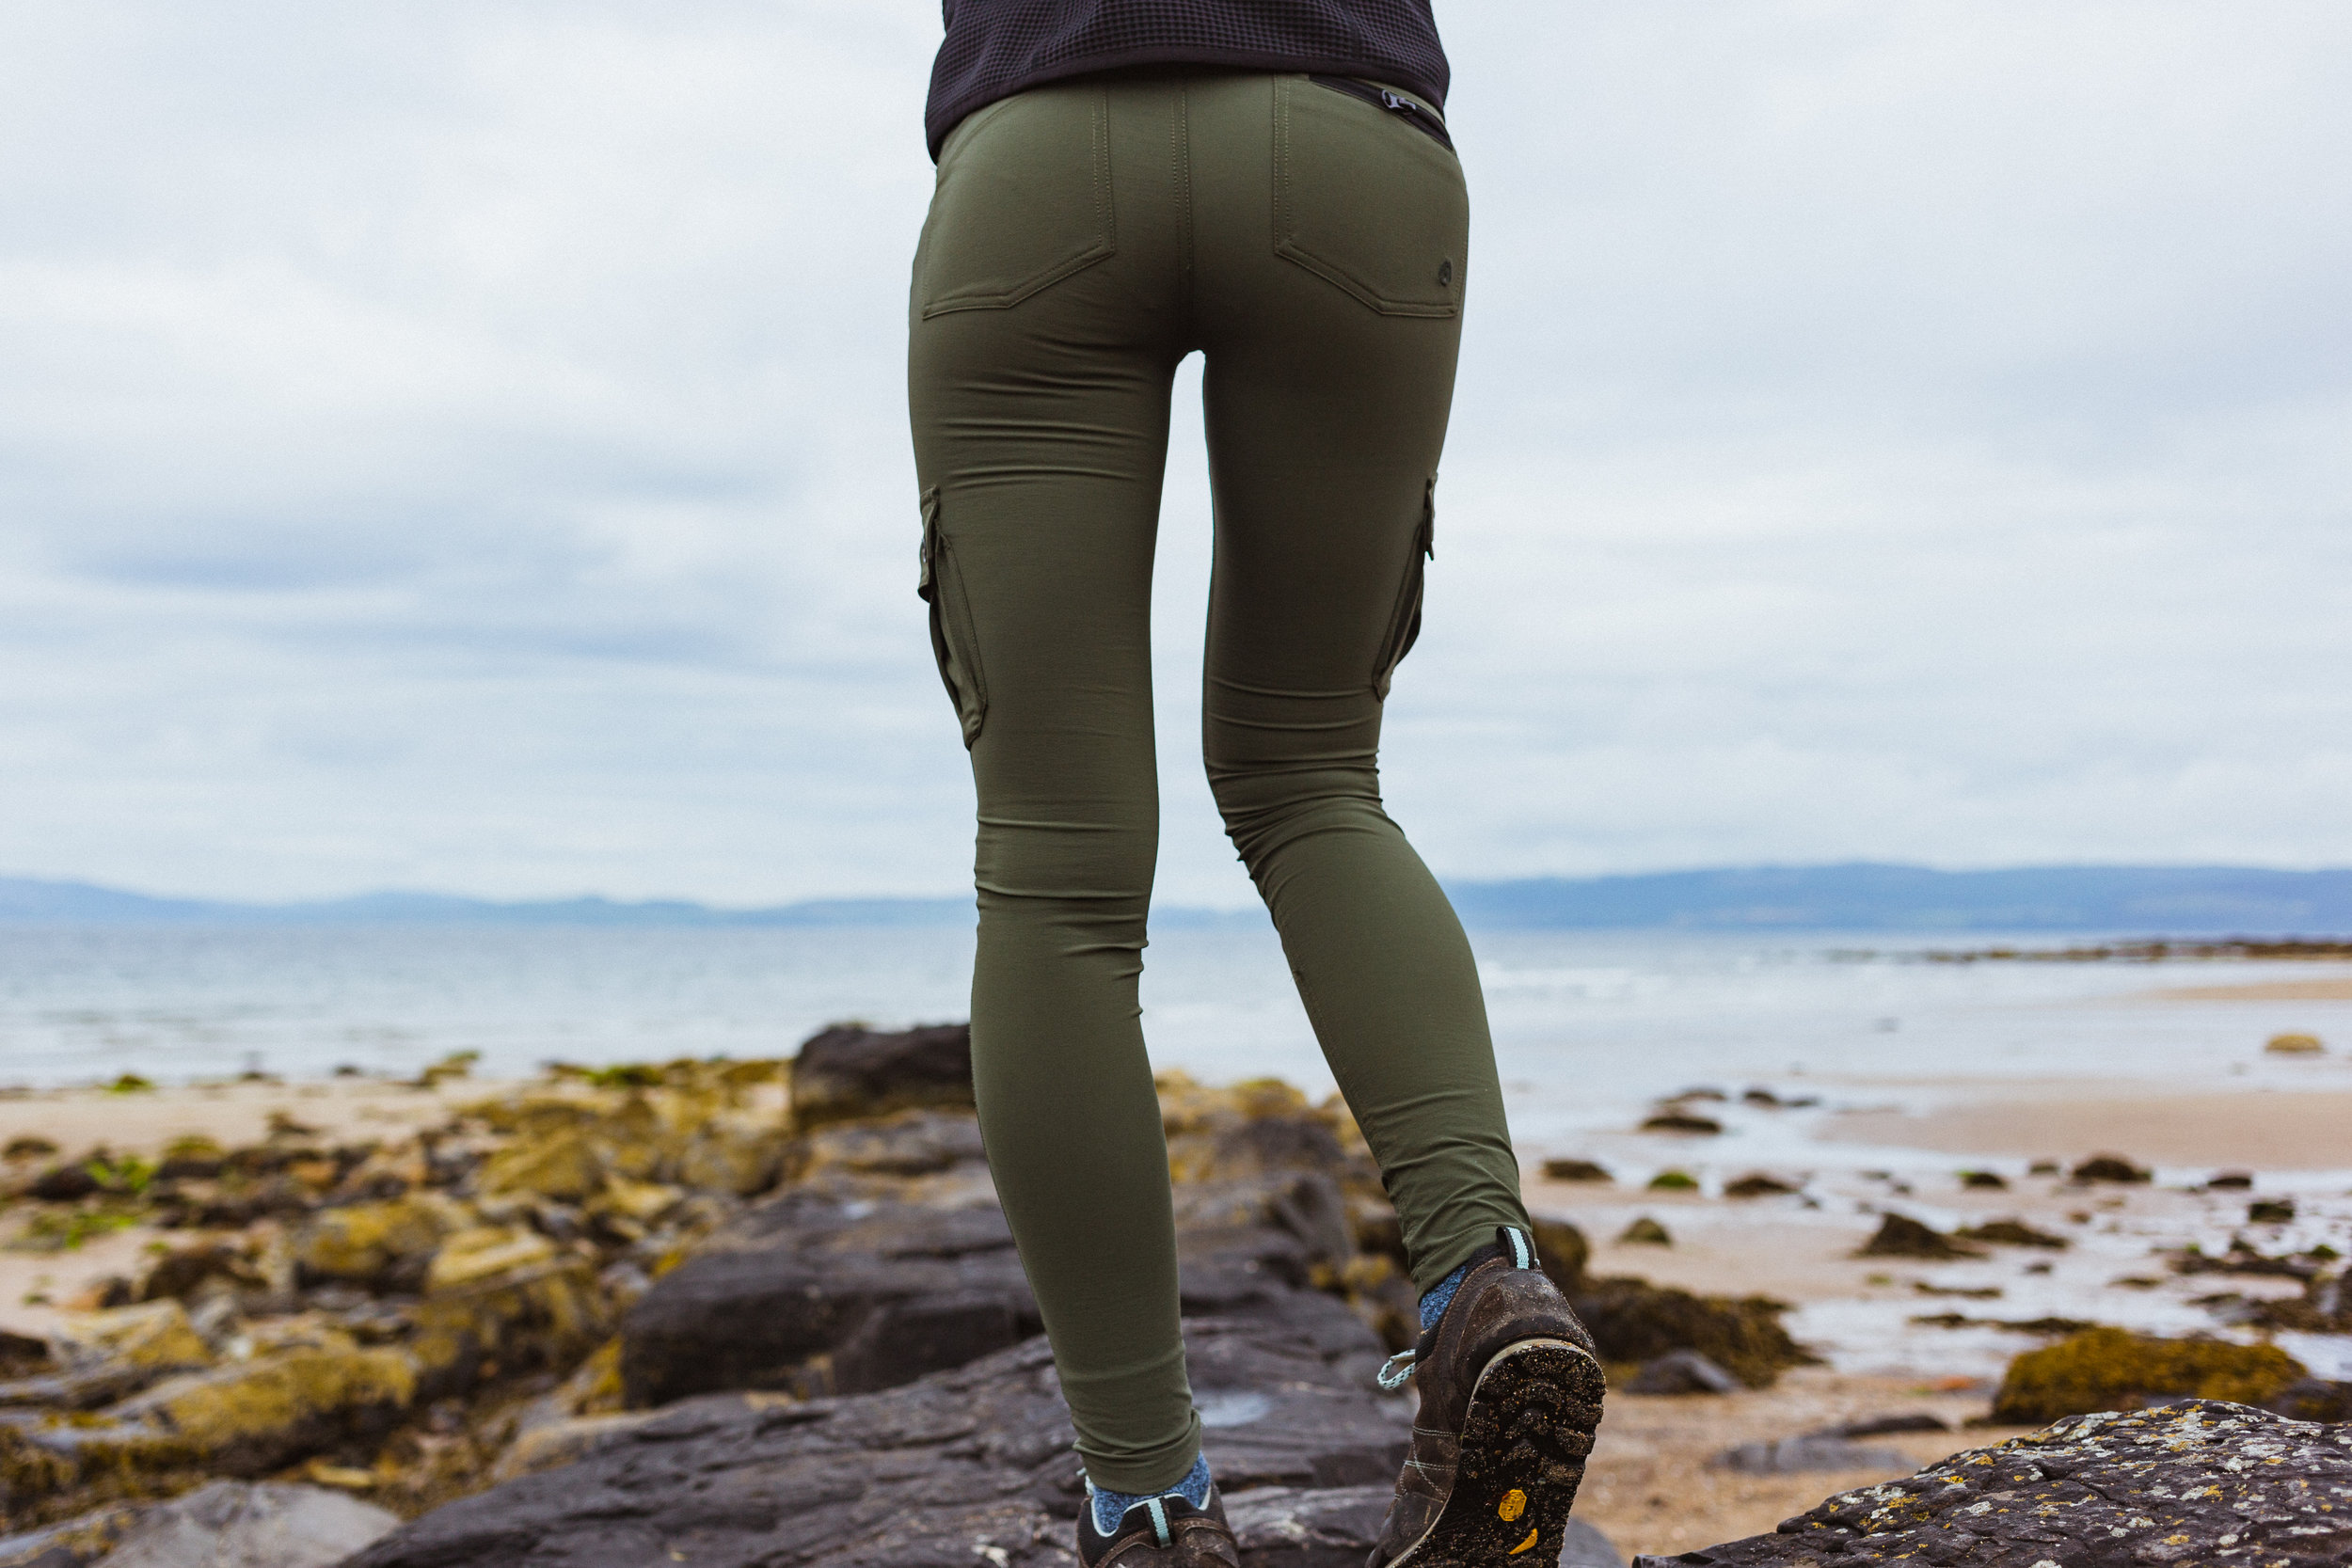 Kit review: Acai Thermal Skinny Outdoor Trousers — Every Body Outdoors